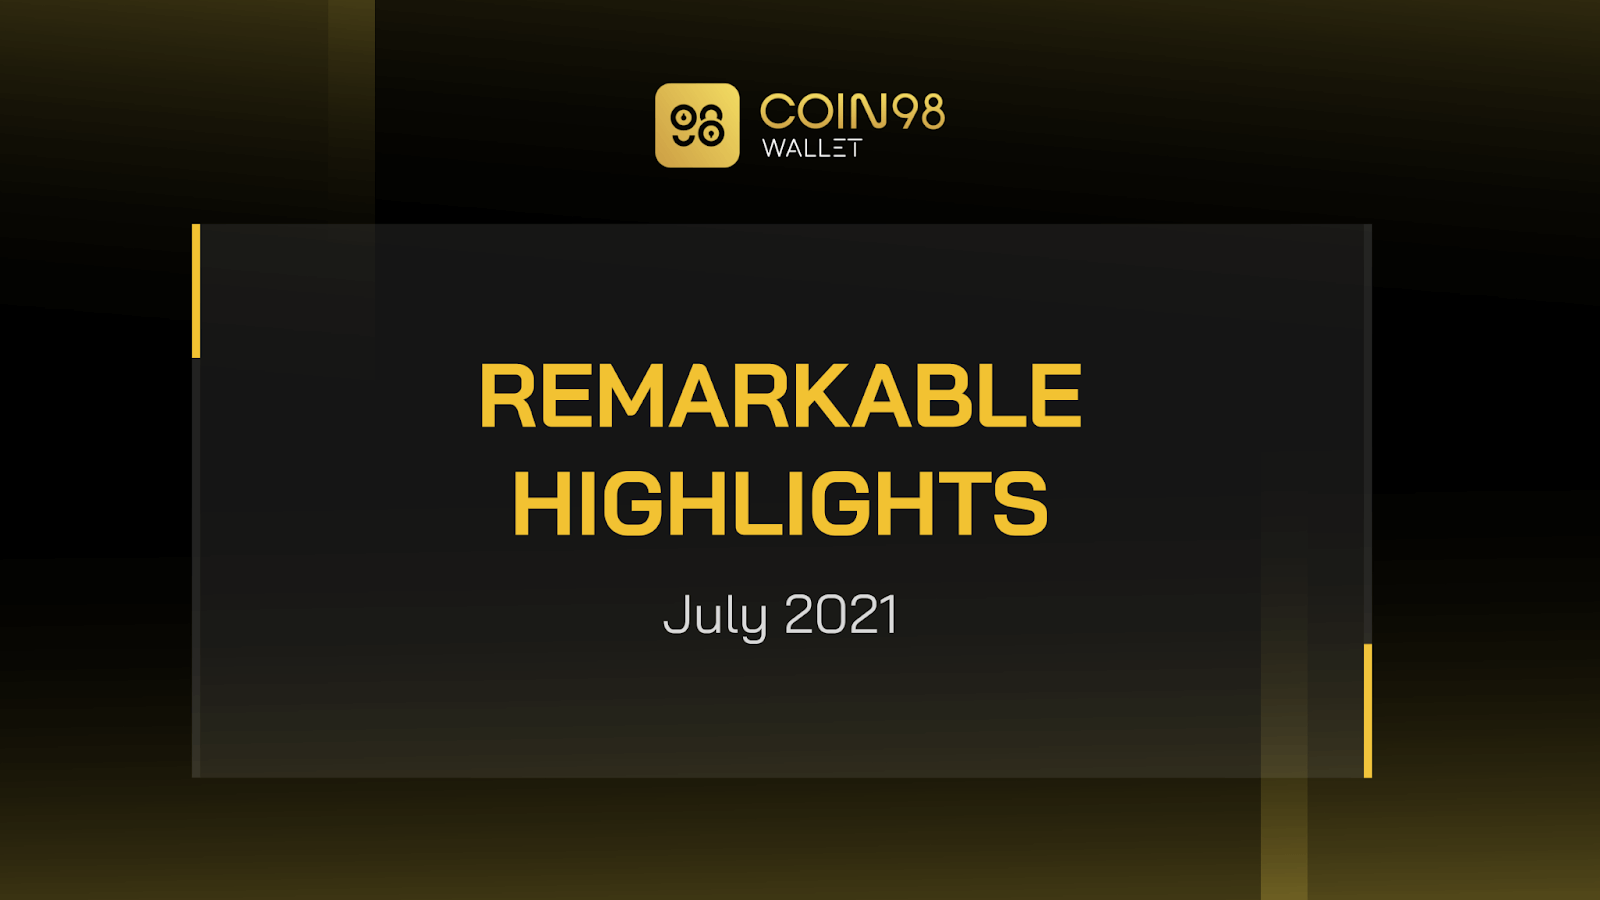 Coin98 Wallet Remarkable Highlights | July 2021